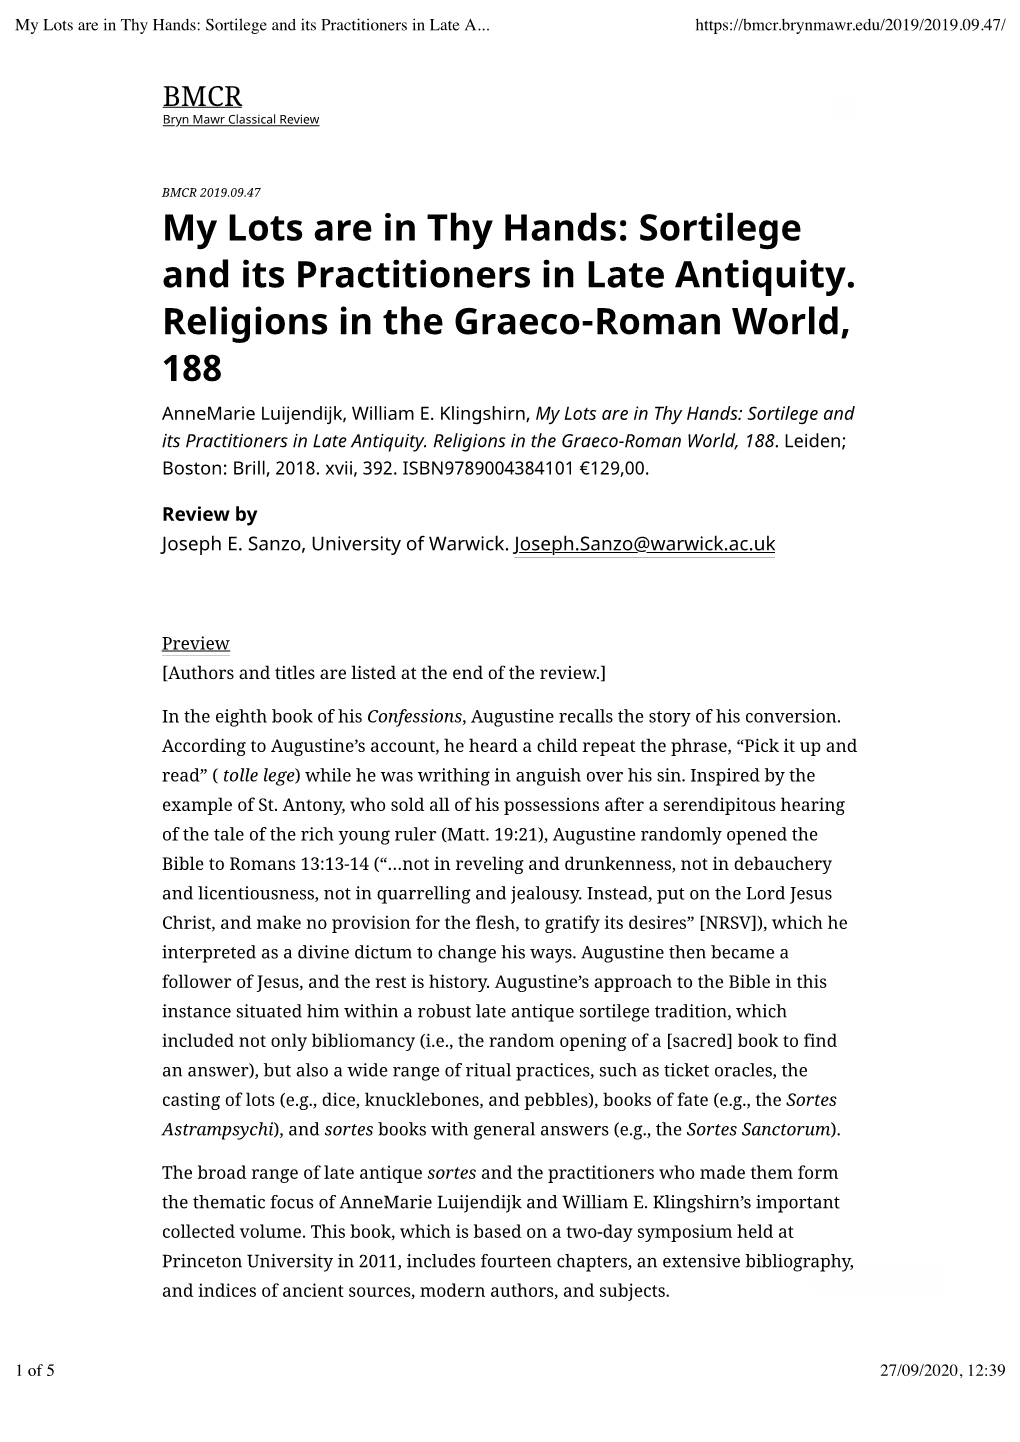 My Lots Are in Thy Hands: Sortilege and Its Practitioners in Late A